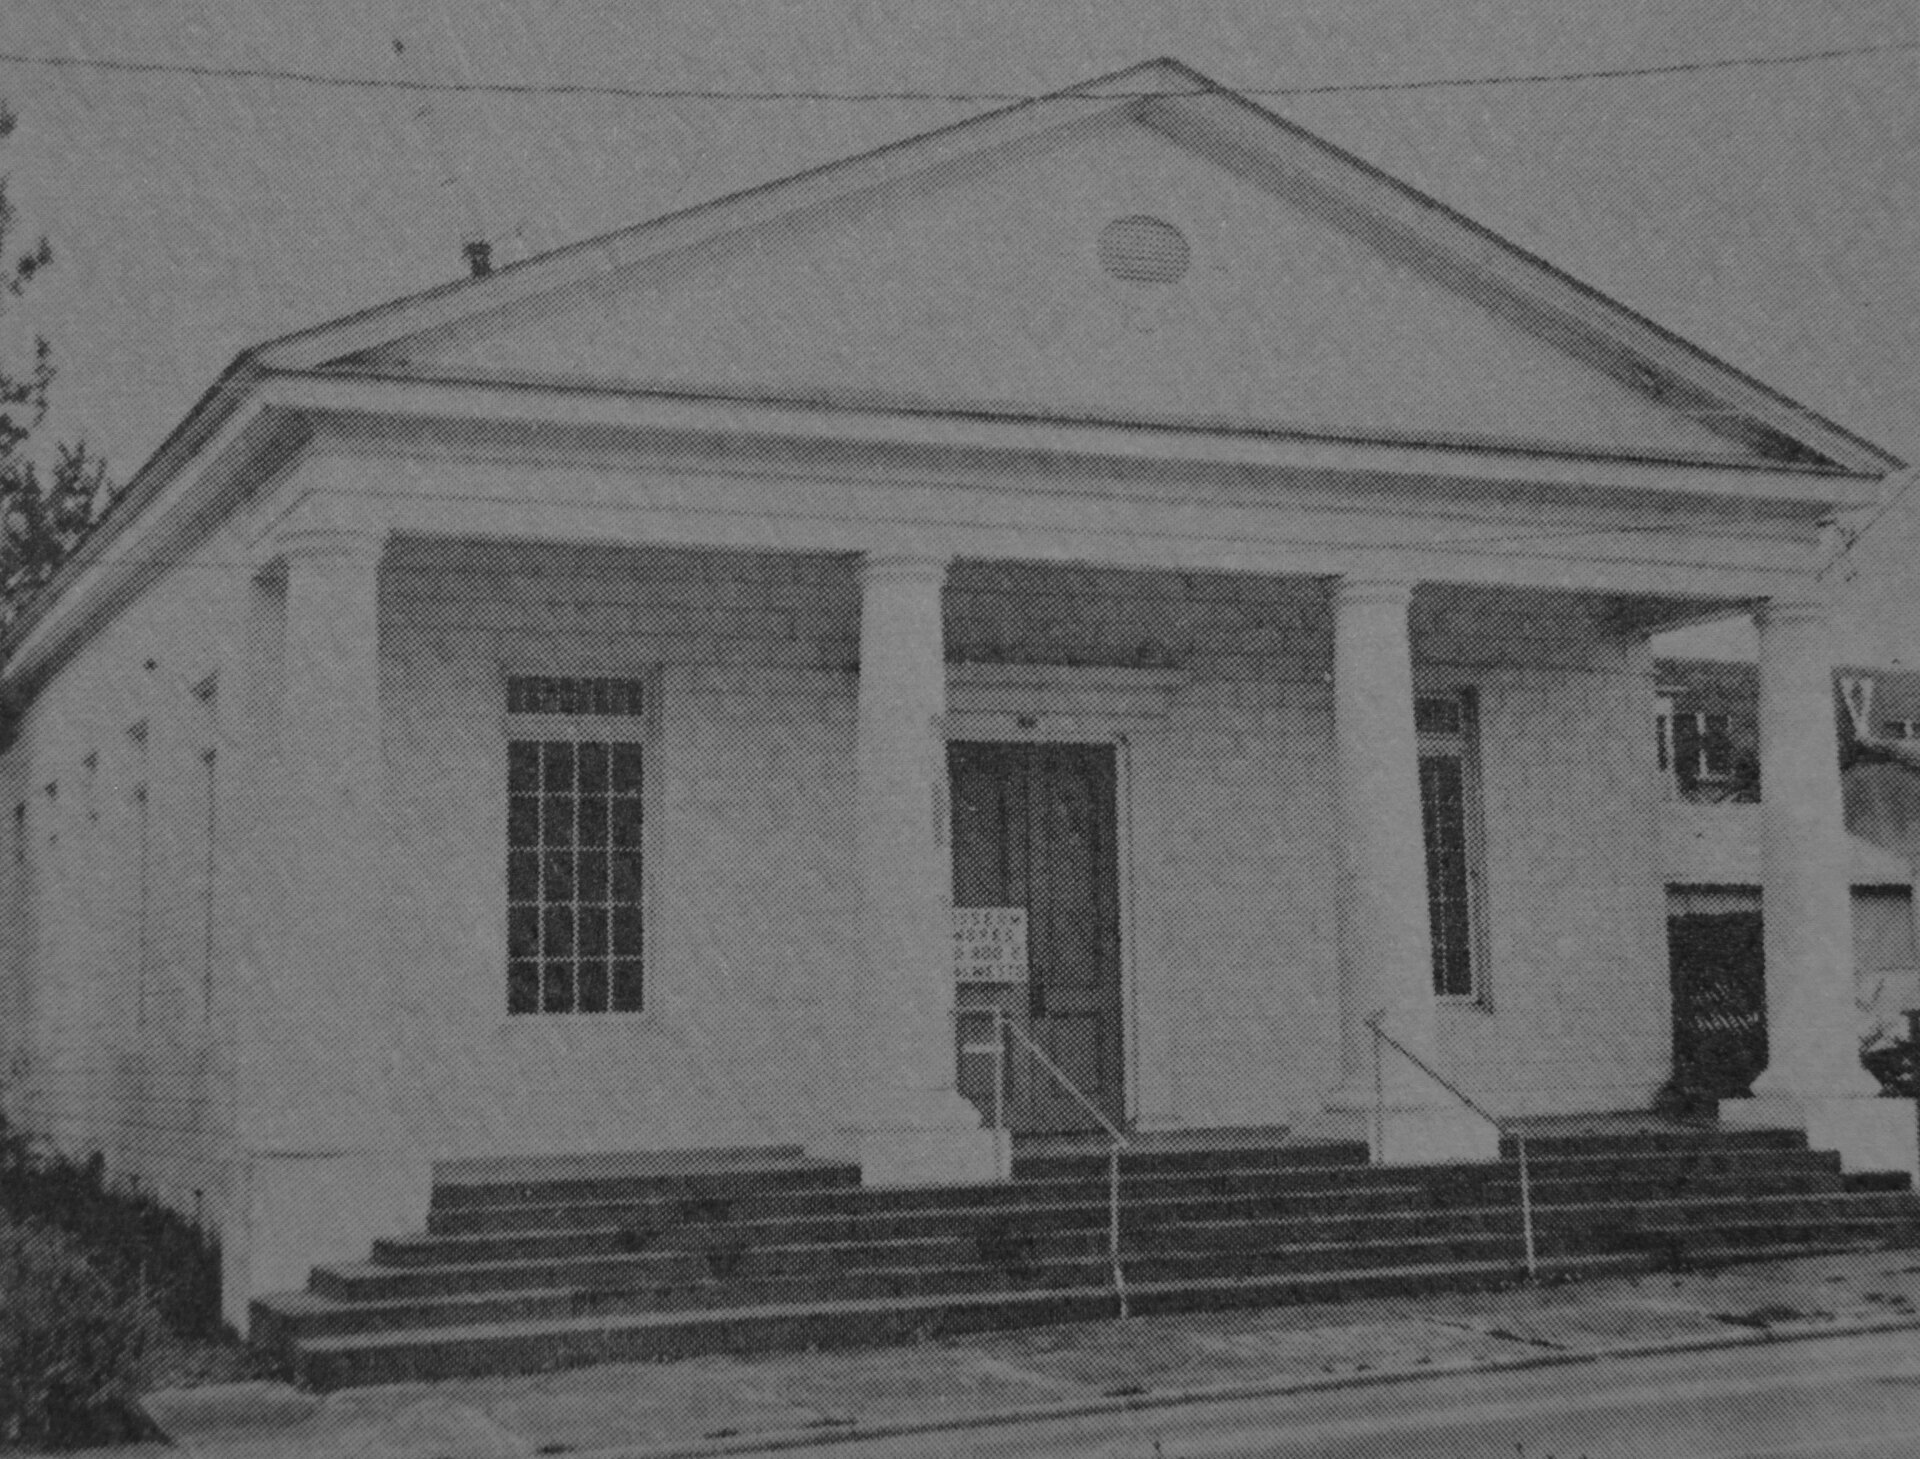  The Museum’s first home, located at 115 East Walnut St.   c. 1965 